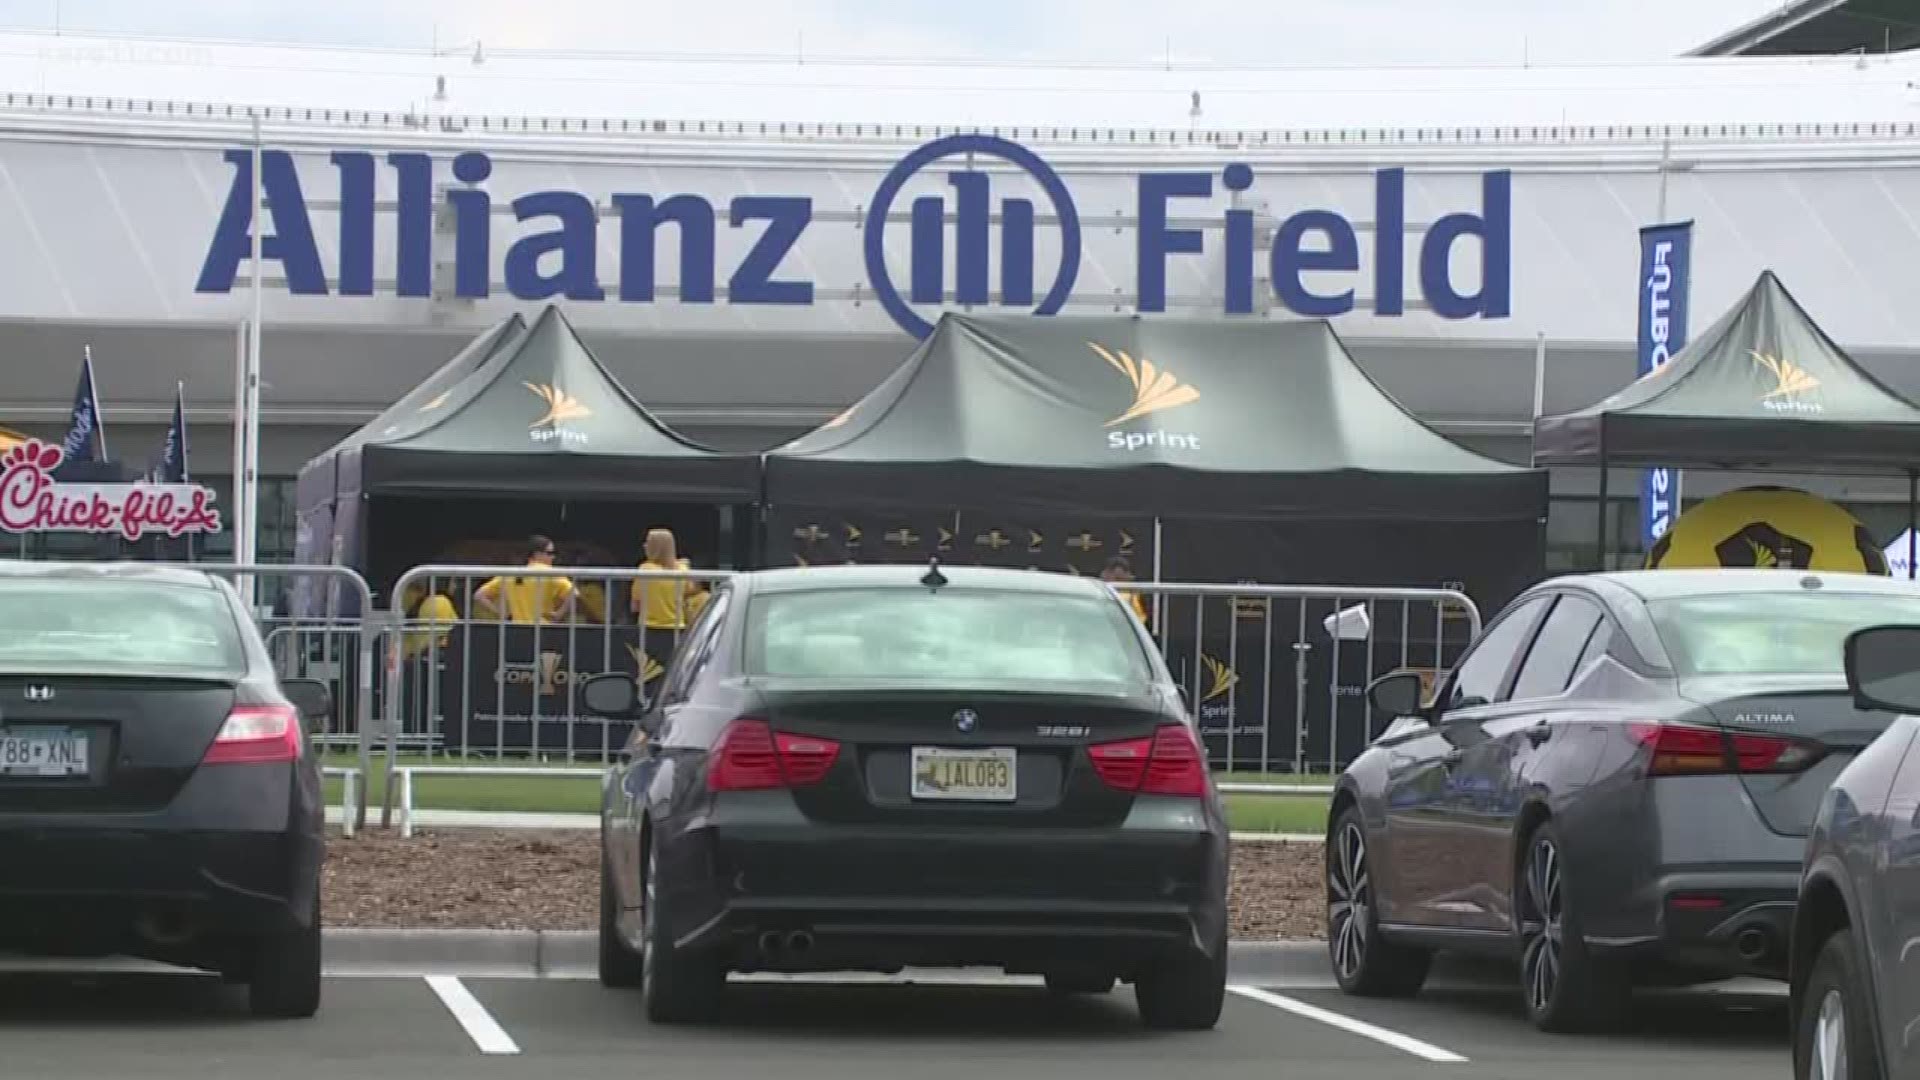 Allianz field will host the first of two big soccer matches, but people in the area are a little on edge tonight.